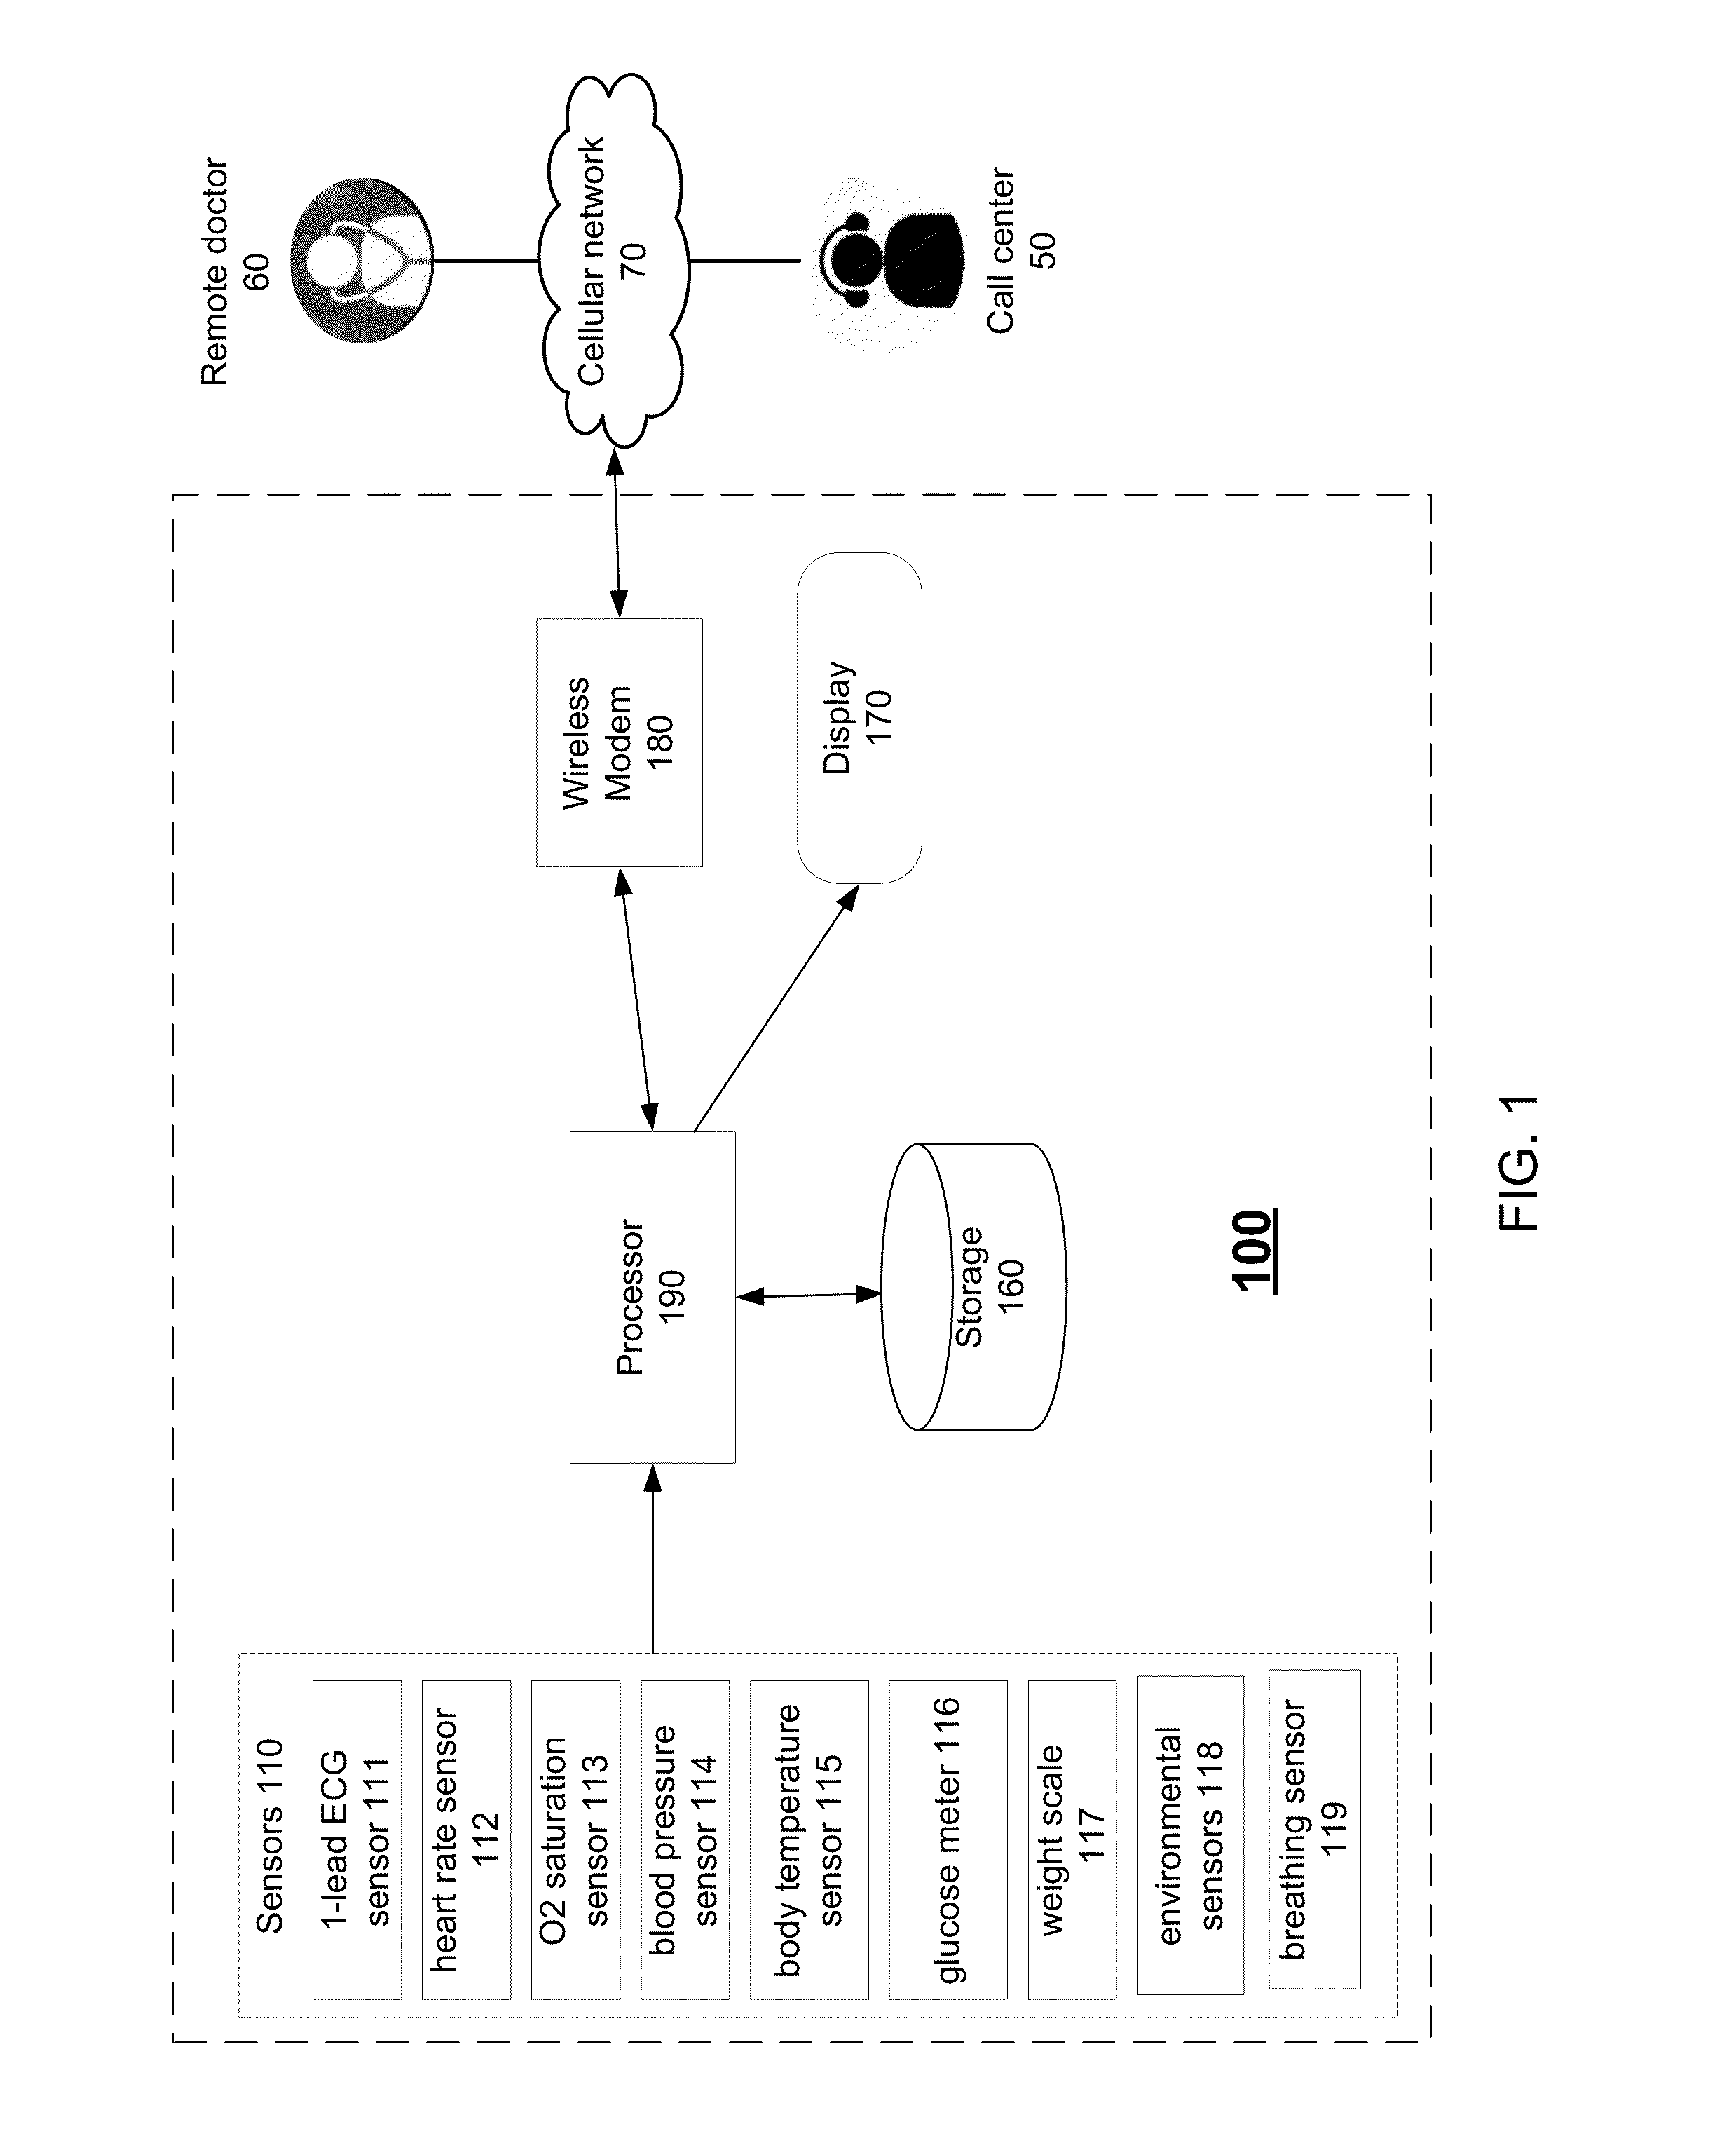 Vehicle driver monitor and a method for monitoring a driver